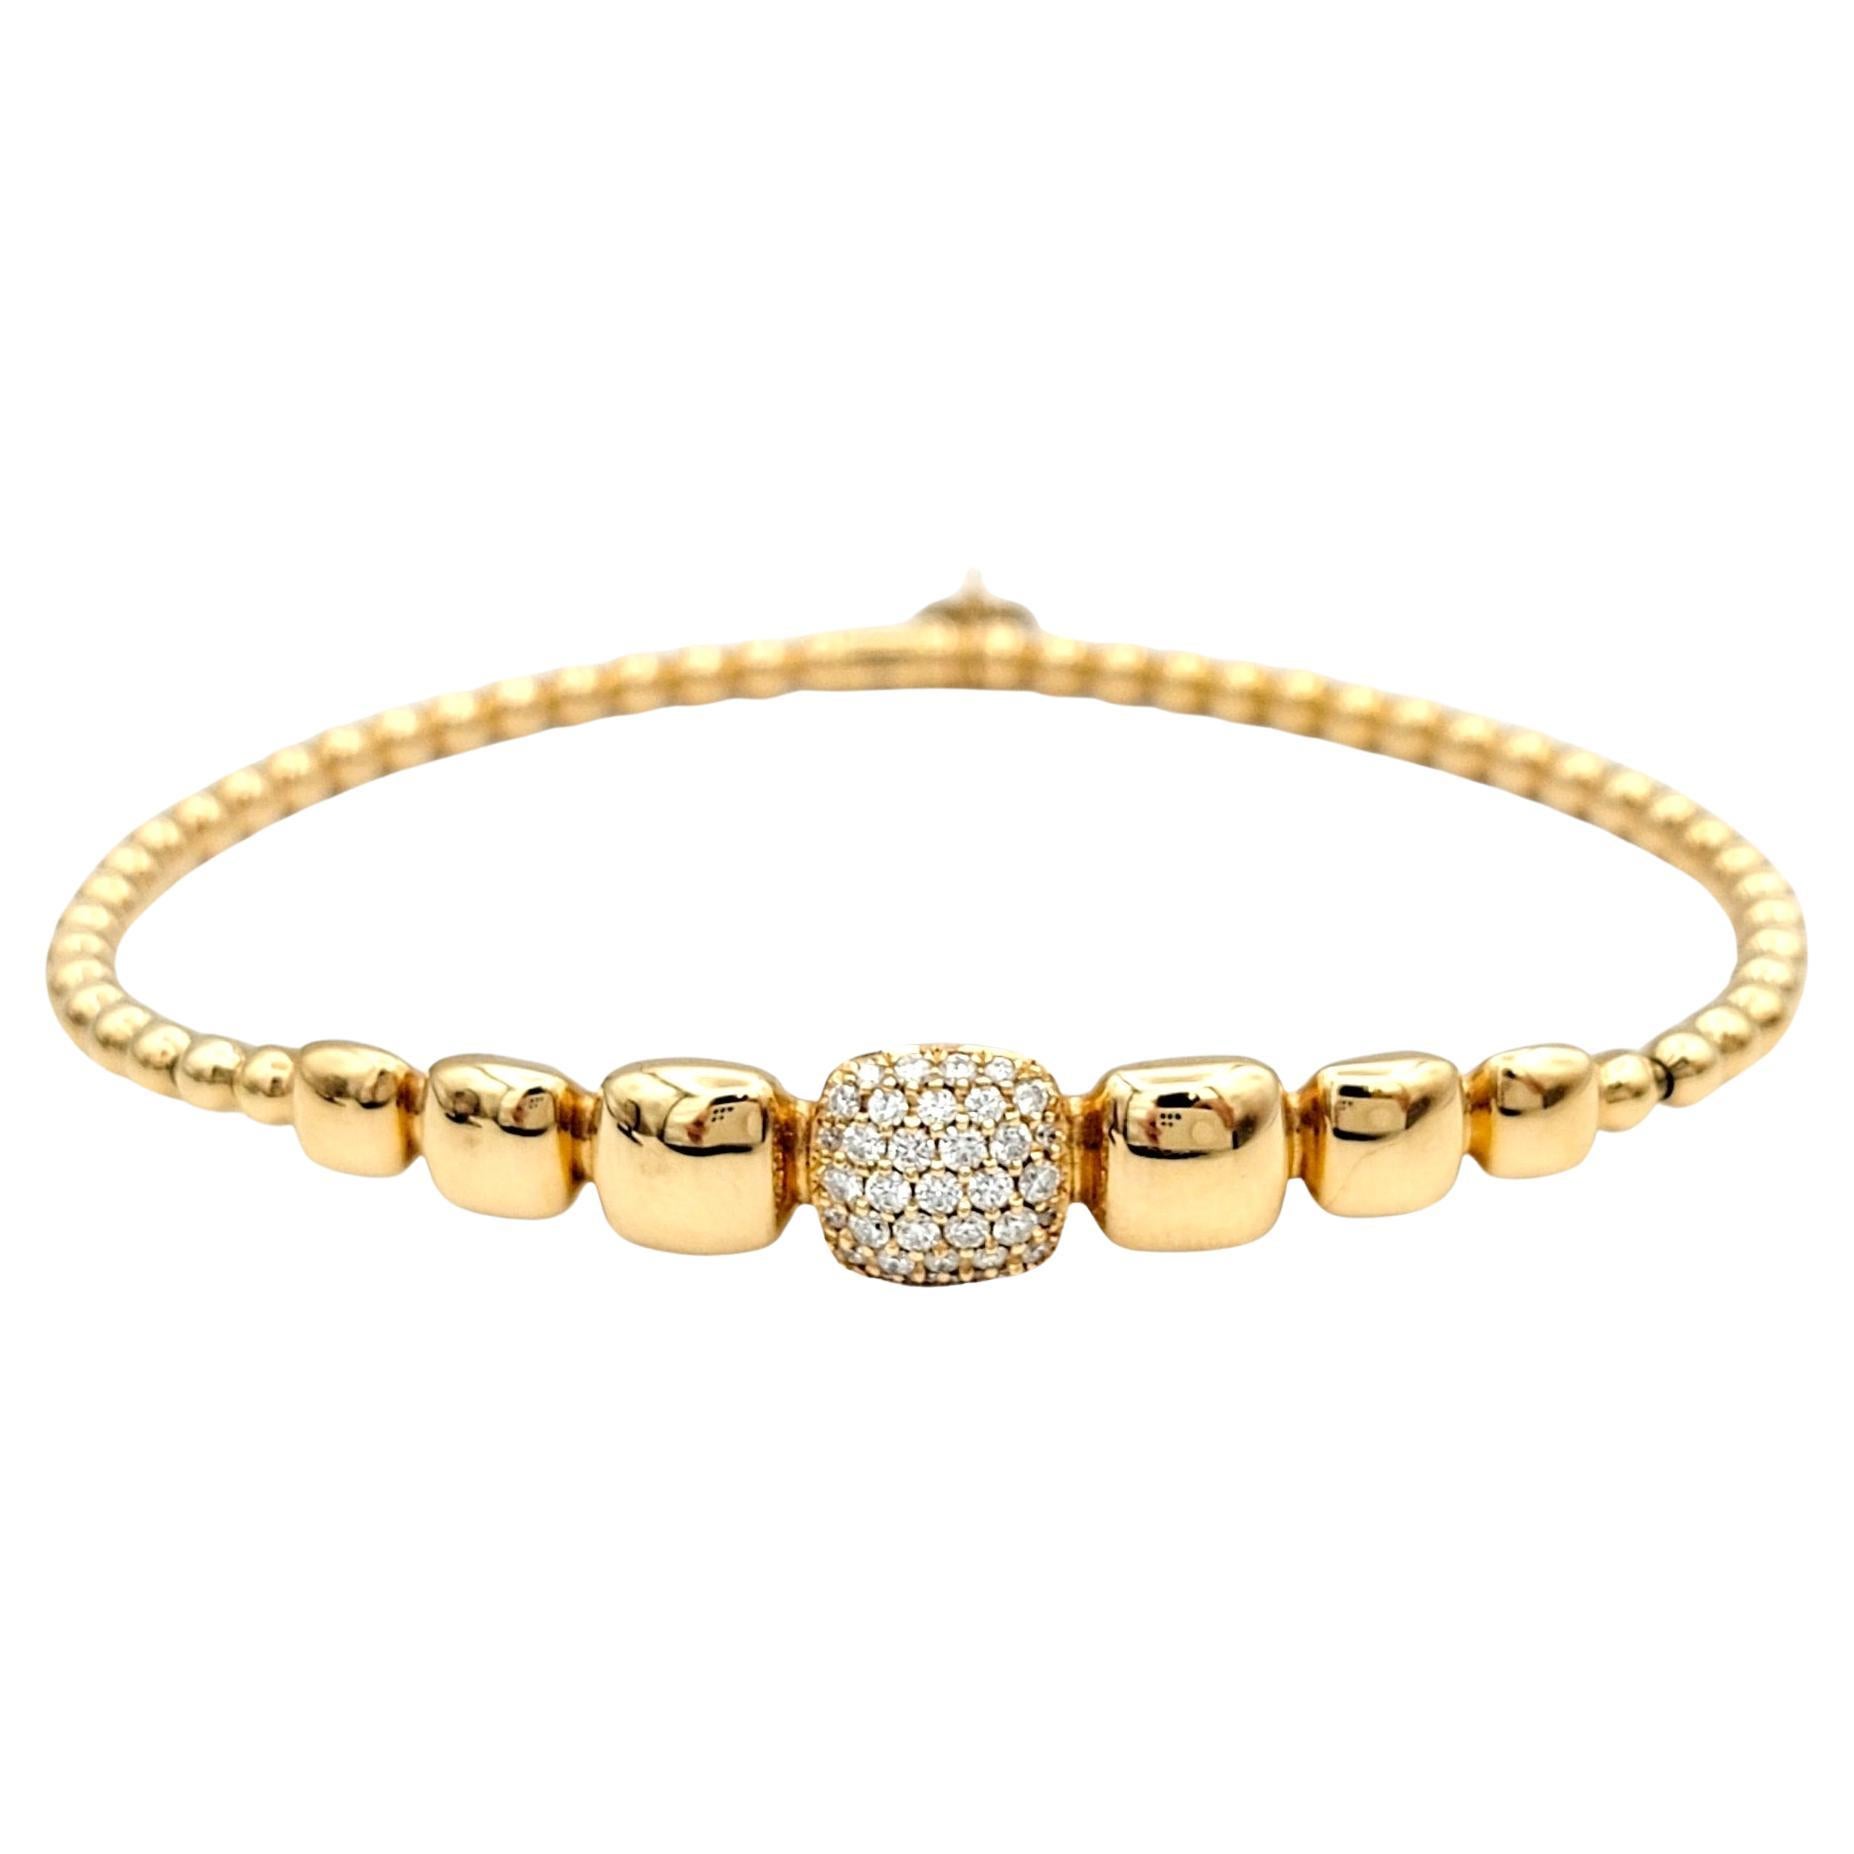 Hulchi Belluni Tresore Collection 3mm Stretch Bracelet Rose Gold with Diamonds  For Sale